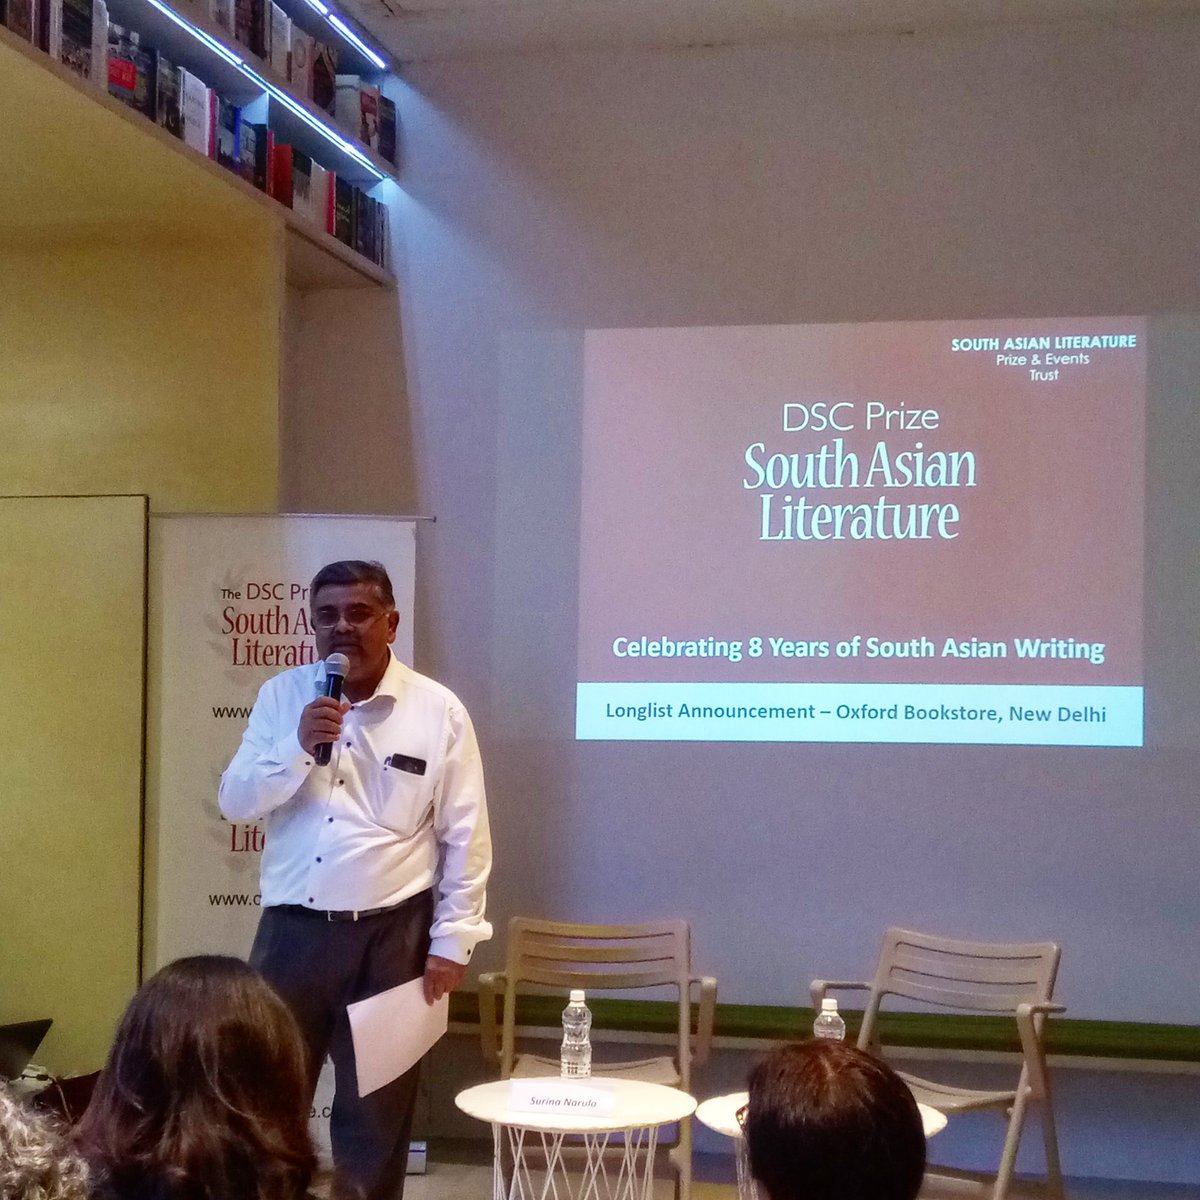 Sixteen novels longlisted for $25,000 DSC Prize for South Asian Literature